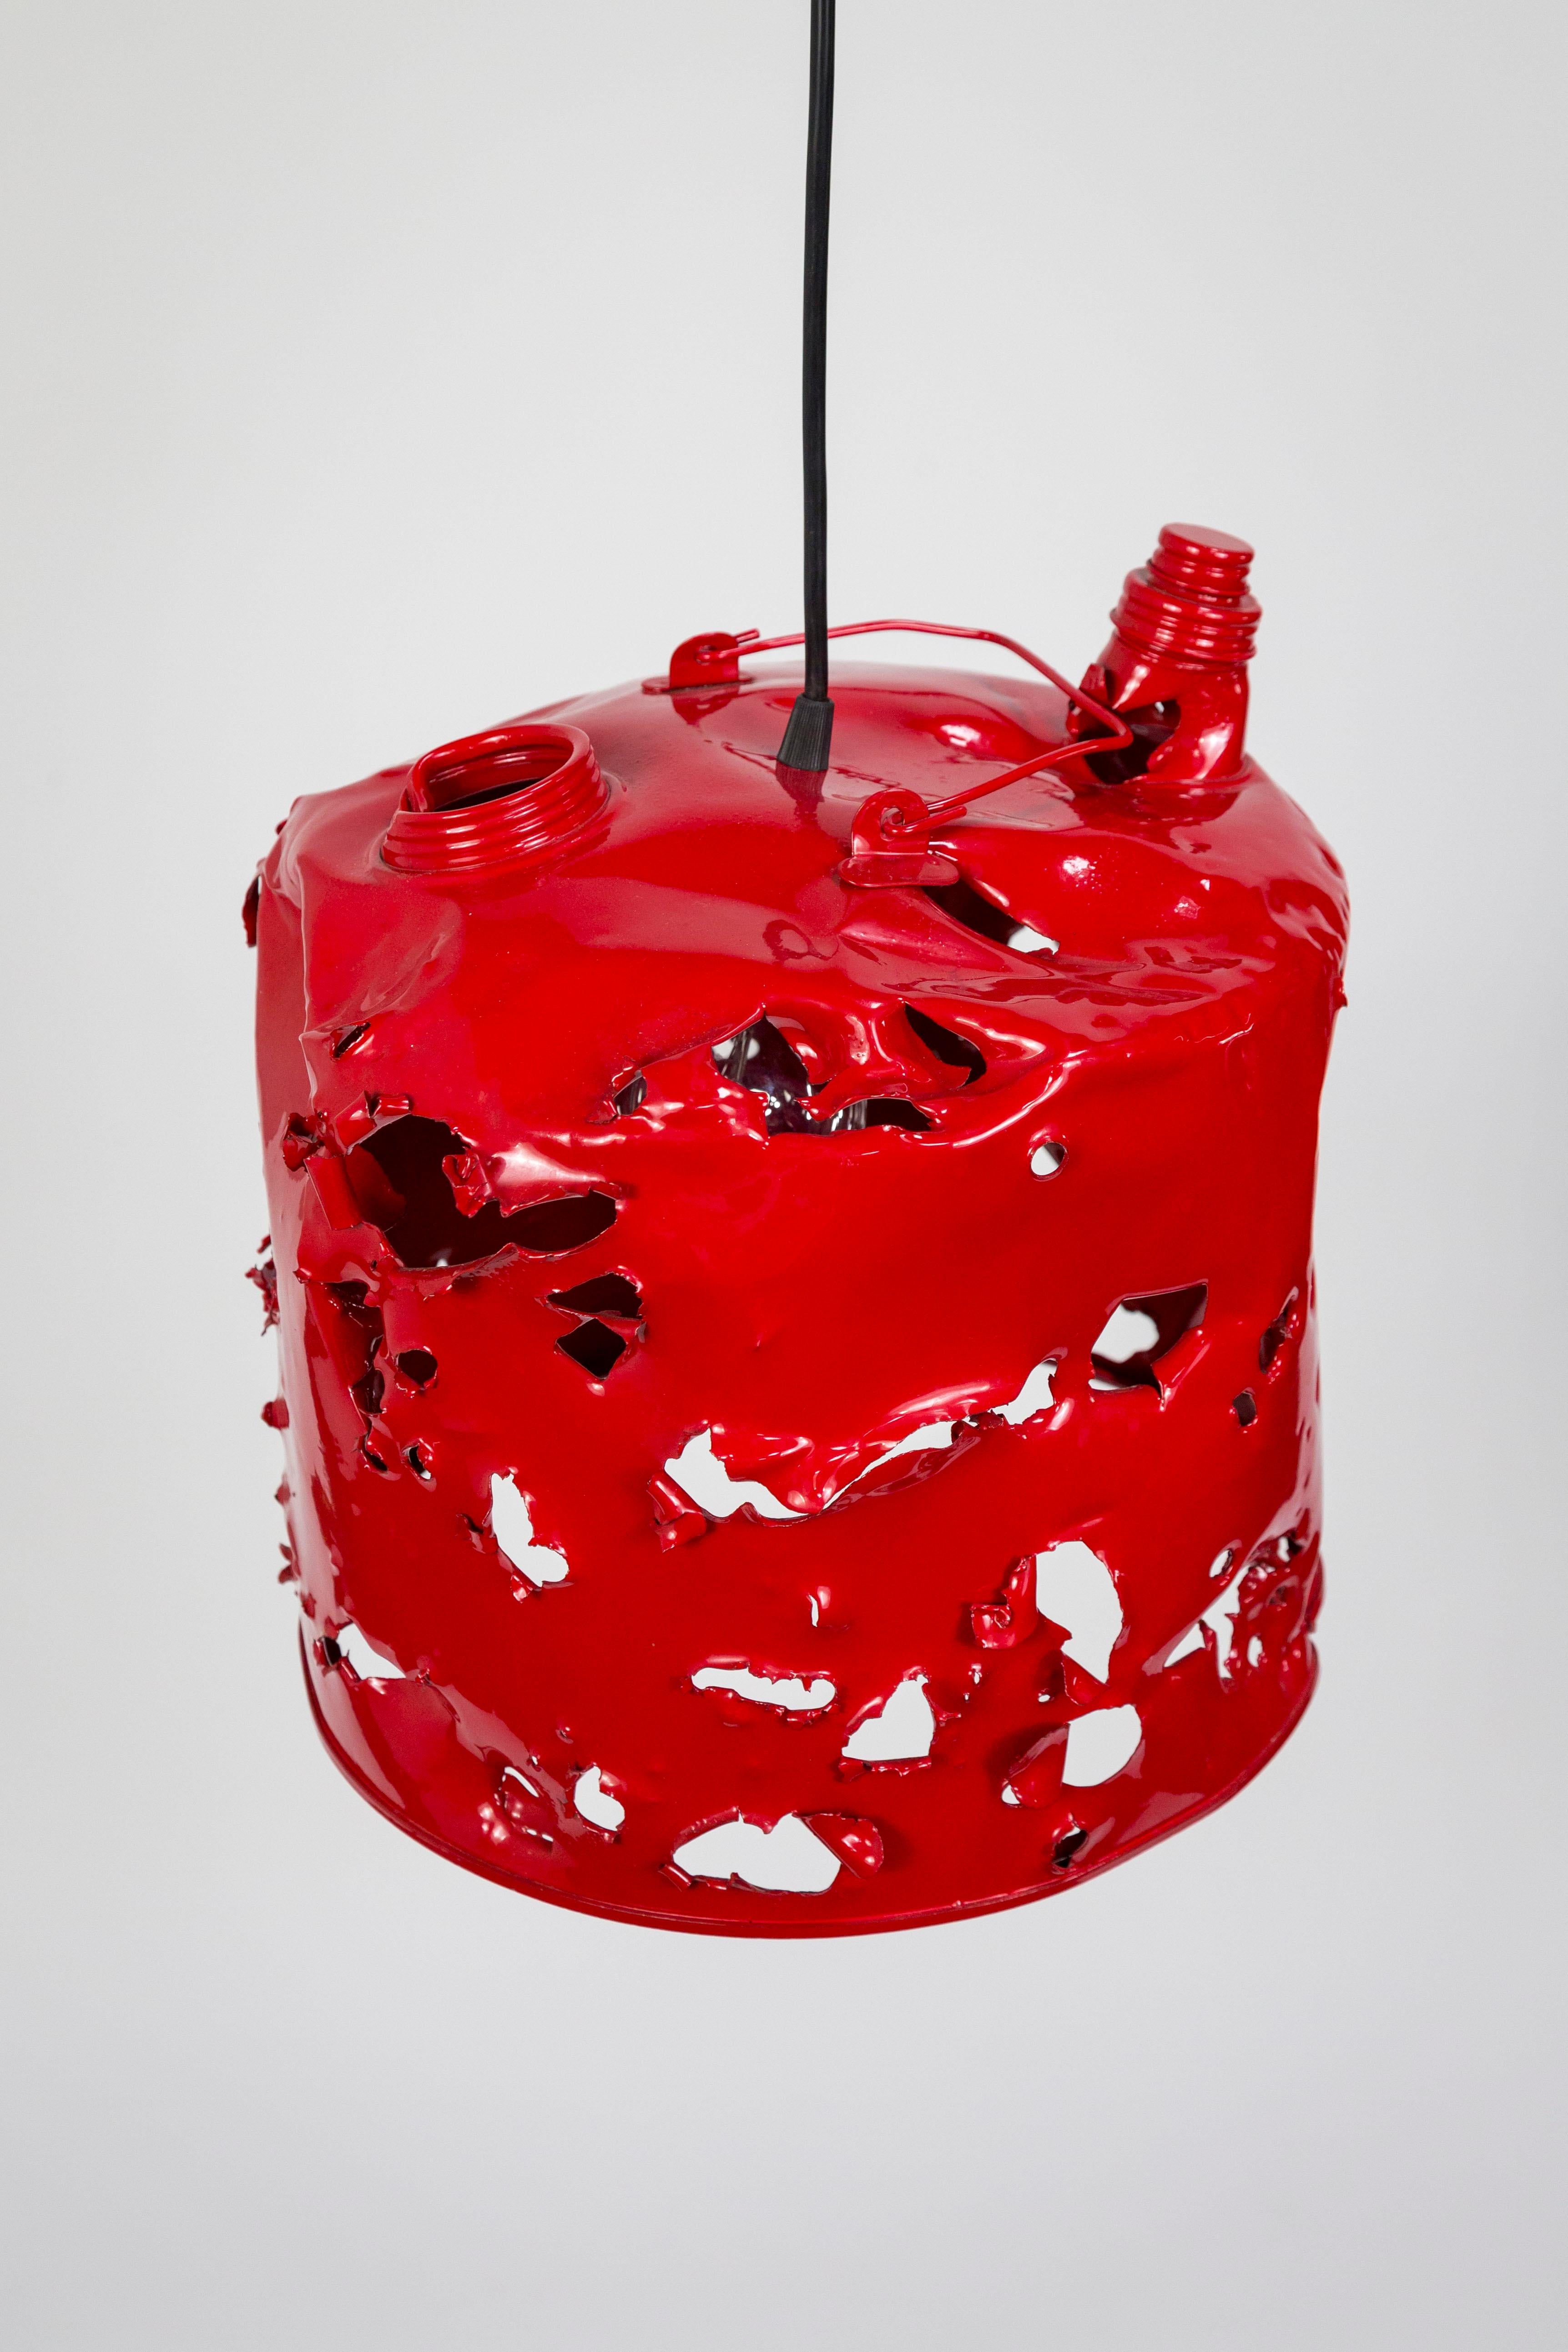 This powder coated, metal gas can is a bold art object by Charles Linder, who has been making artwork out of bullet-riddled objects for over 30 years. Growing up in Alabama he would find the abandoned targets and eventually repurpose them as